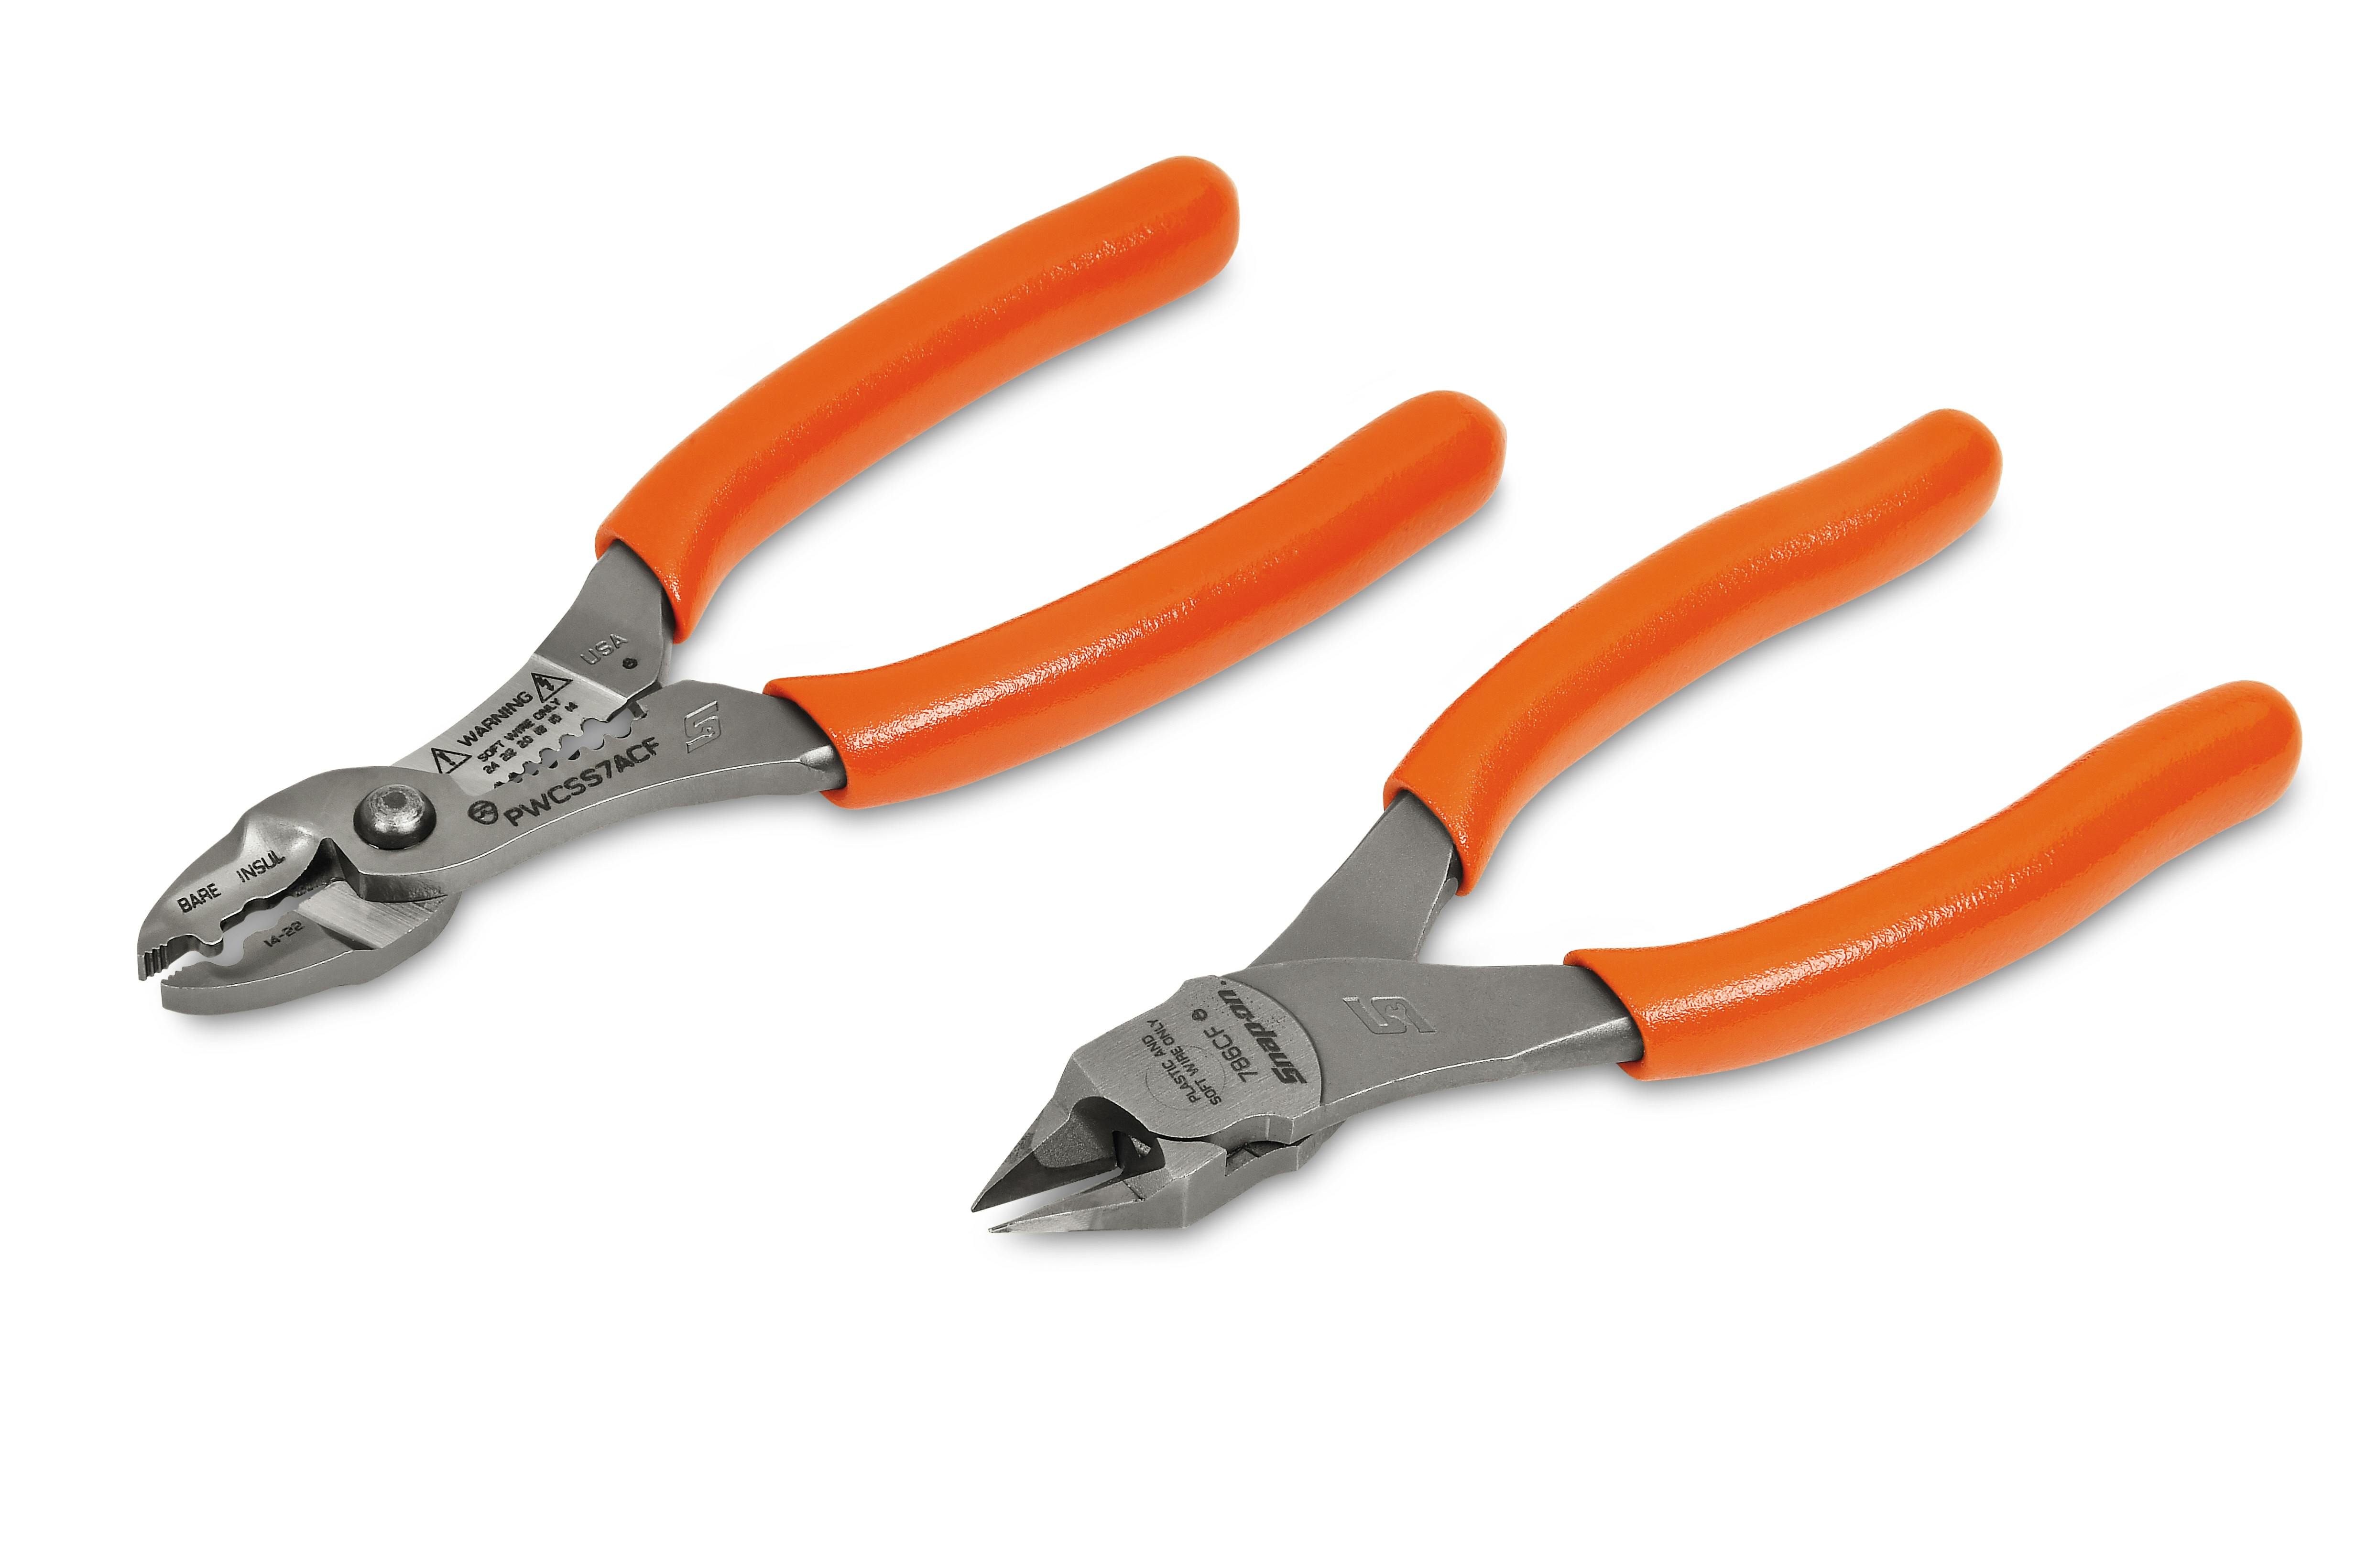 Snap On Orange Colored Wire Cutter Stripper And Crimper Pliers. 